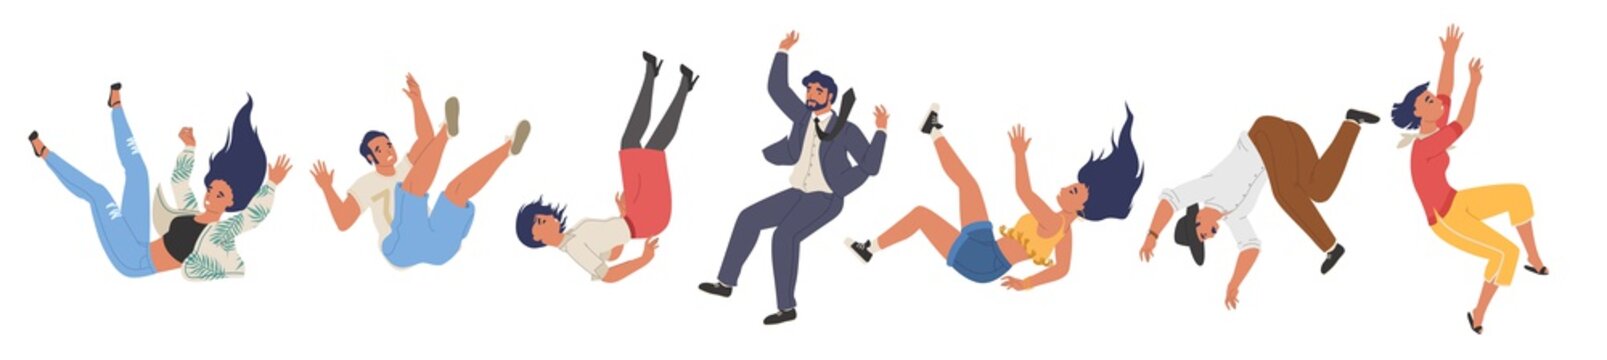 Falling character set, flat vector illustration. Shocked falling down people because of stumbling, slipping, accident.